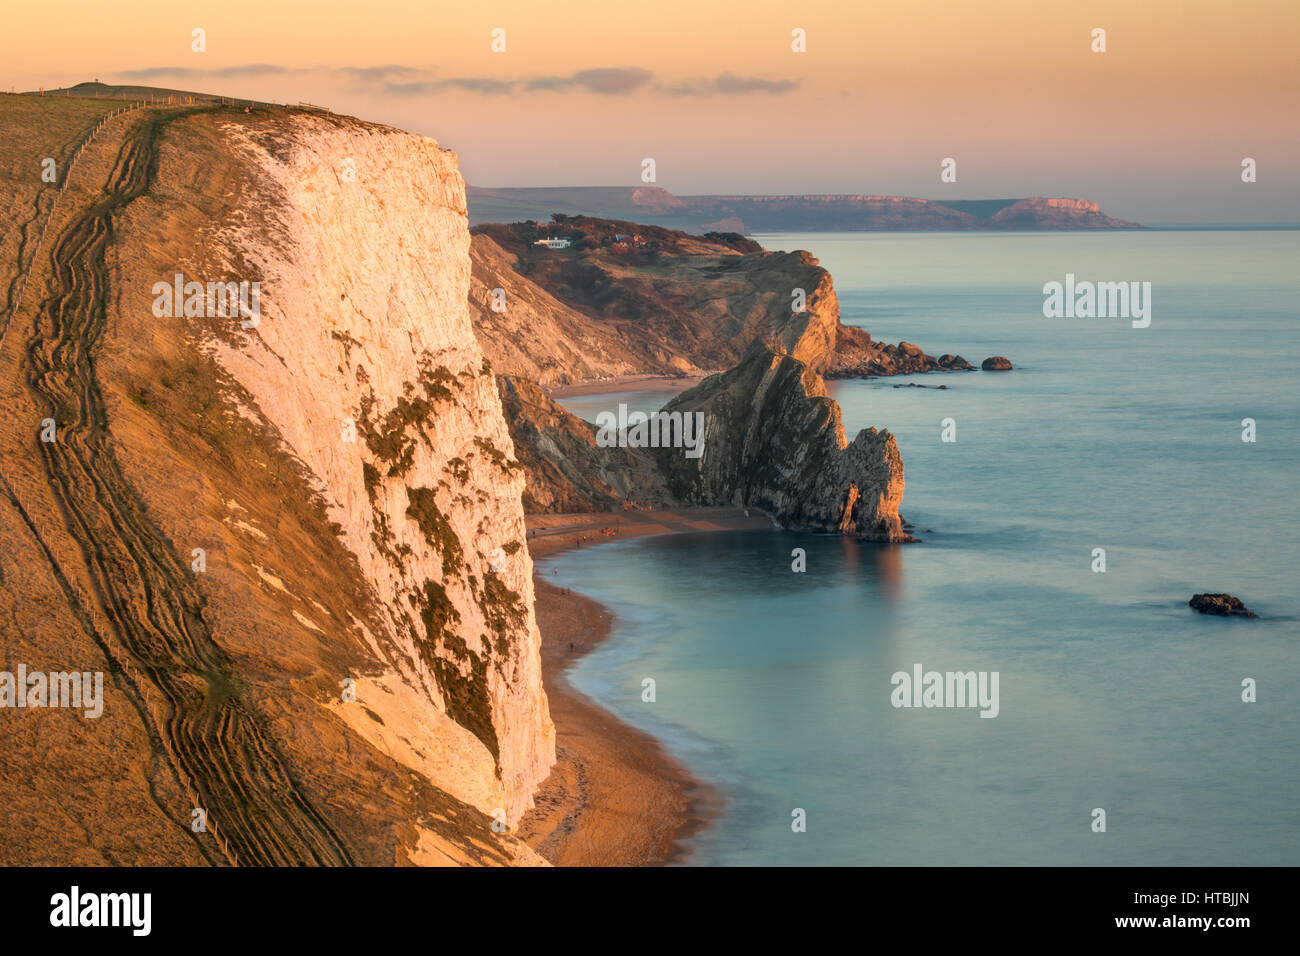 Durdle Door and St Oswald's Bay from Bat's Head at dusk, Purbeck, Jurassic Coast, Dorset, England, UK Stock Photo